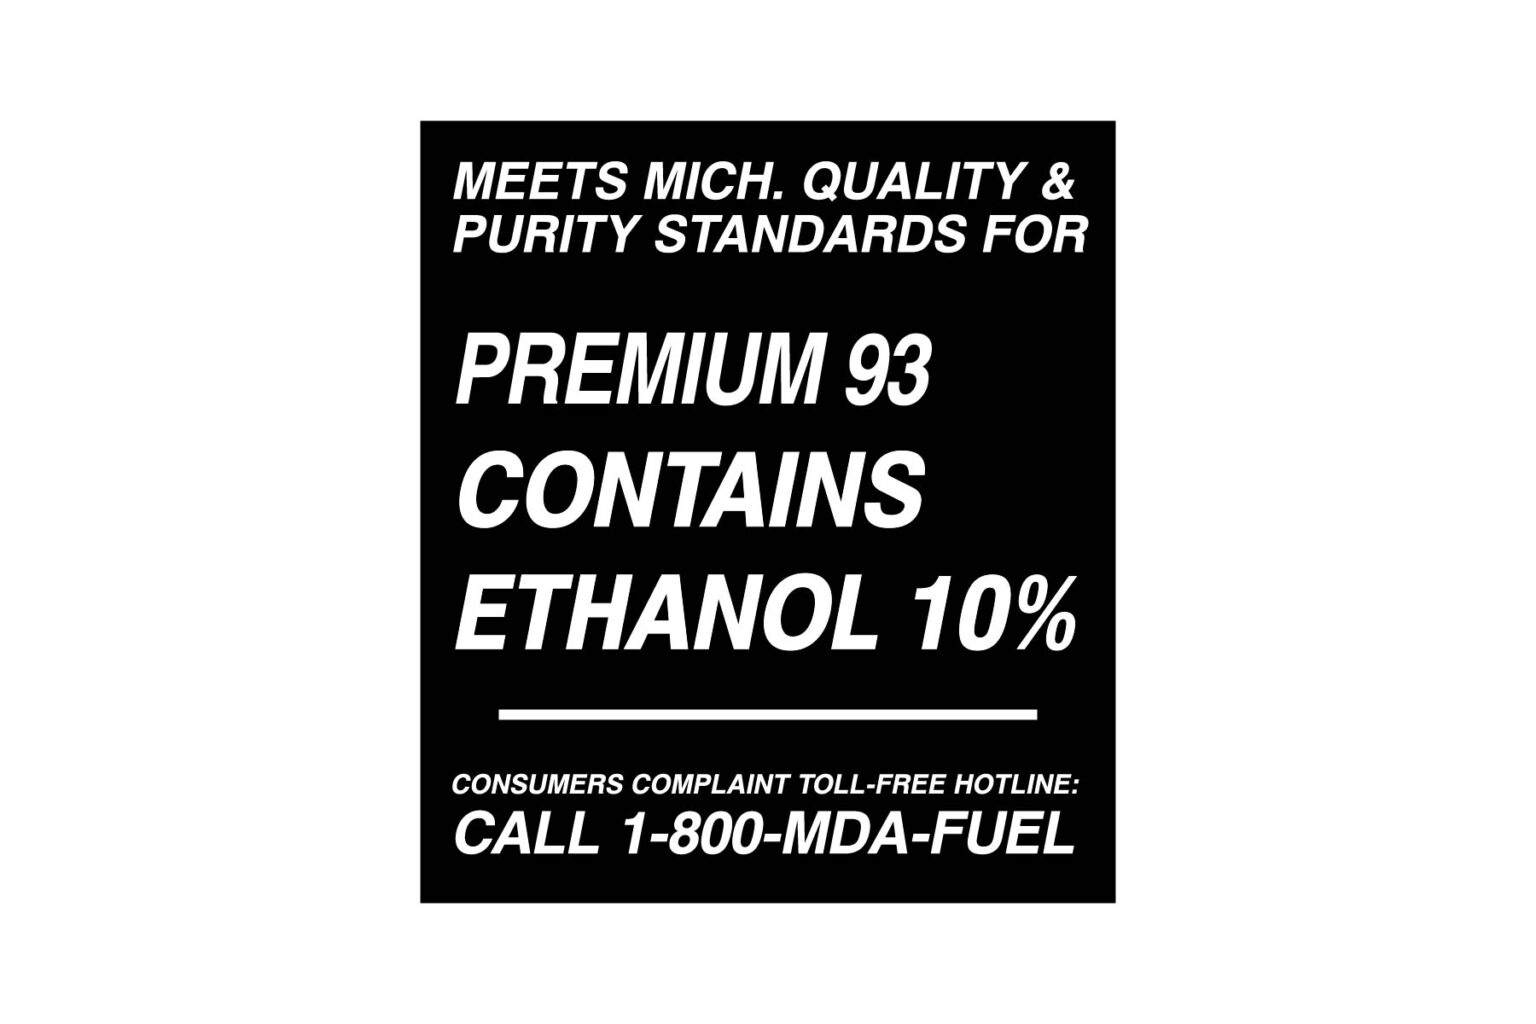 Meets Michigan Quality & Purity Standards for Premium 93 Contains Ethanol 10% Decal